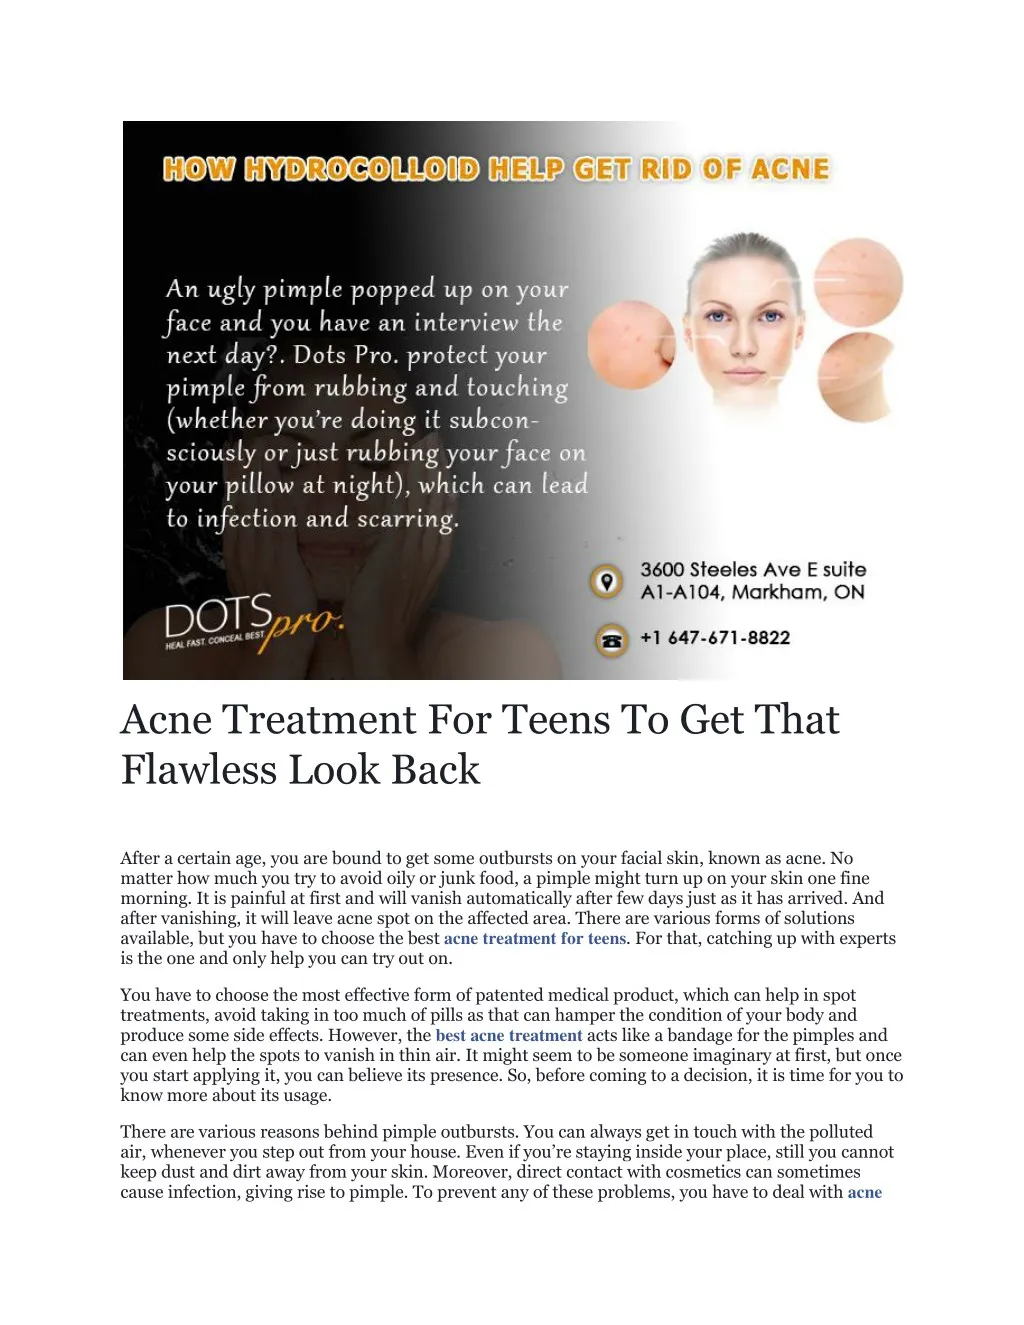 acne treatment for teens to get that flawless